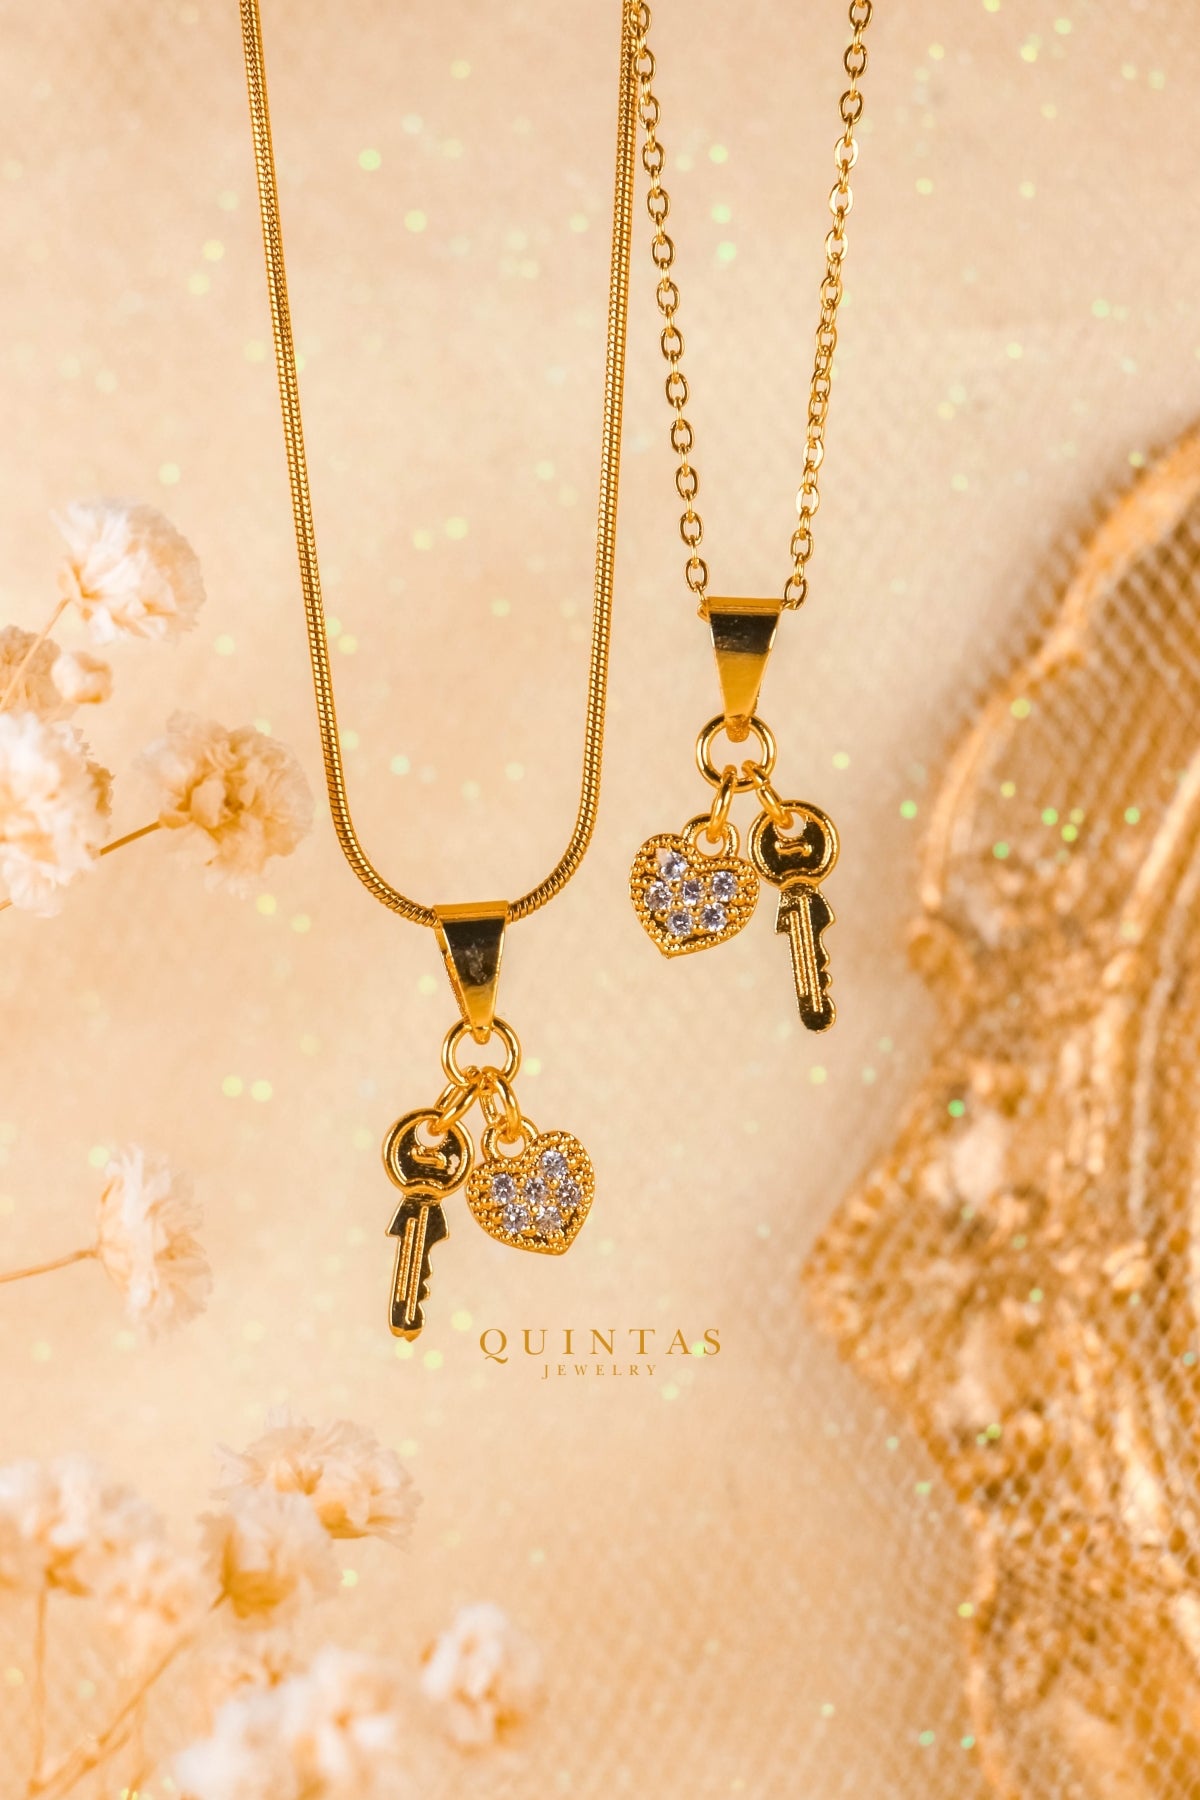 QUINTAS Heart and Key Necklace